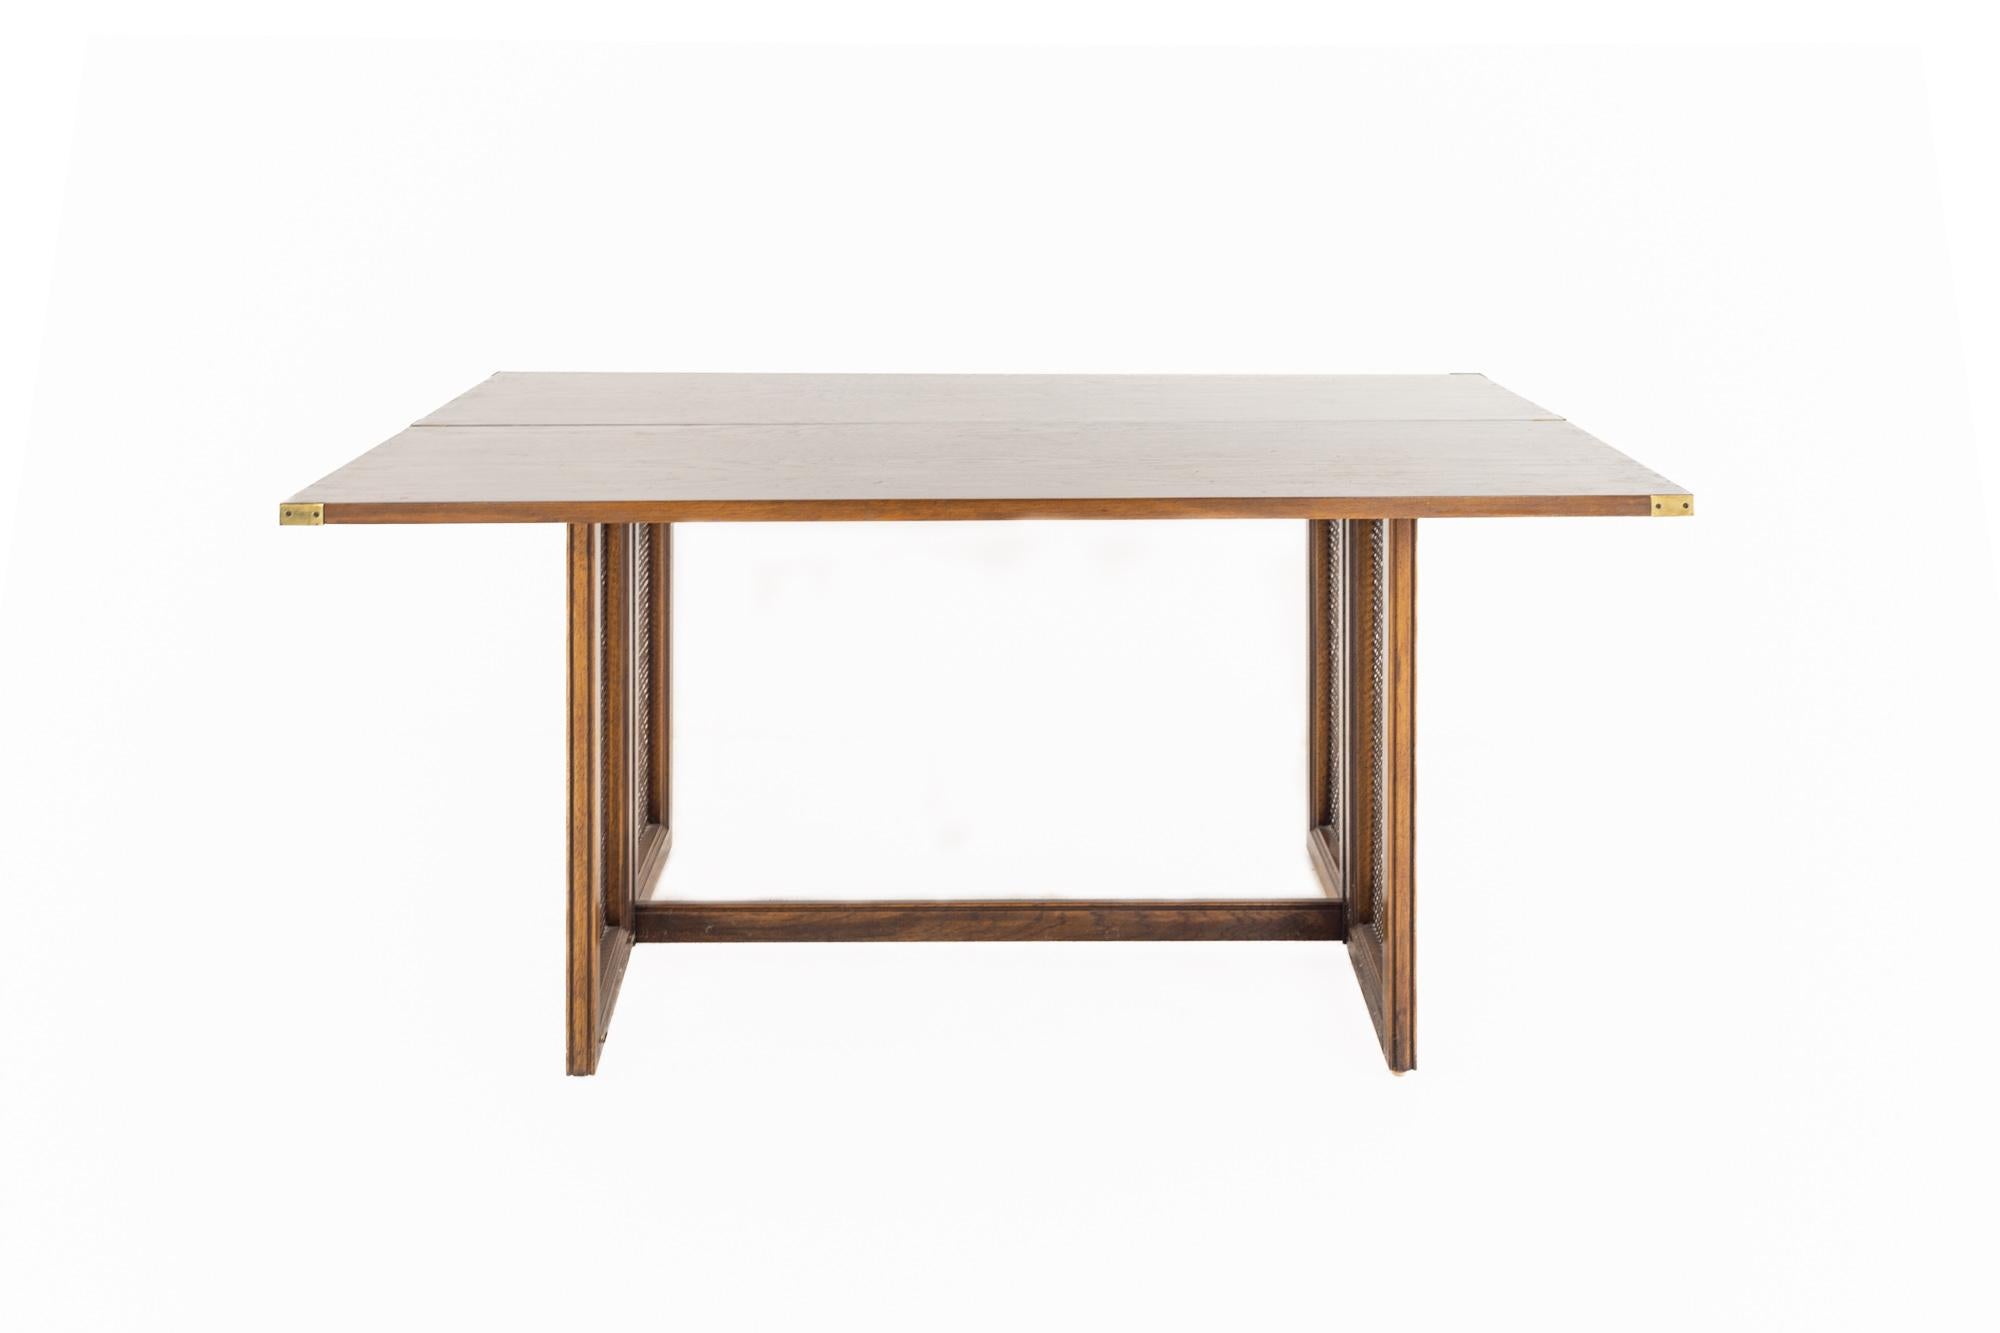 Drexel mid century walnut and cane flip console dining table

The table measures: 60 wide x 36 deep x 28.5 inches high

All pieces of furniture can be had in what we call restored vintage condition. That means the piece is restored upon purchase